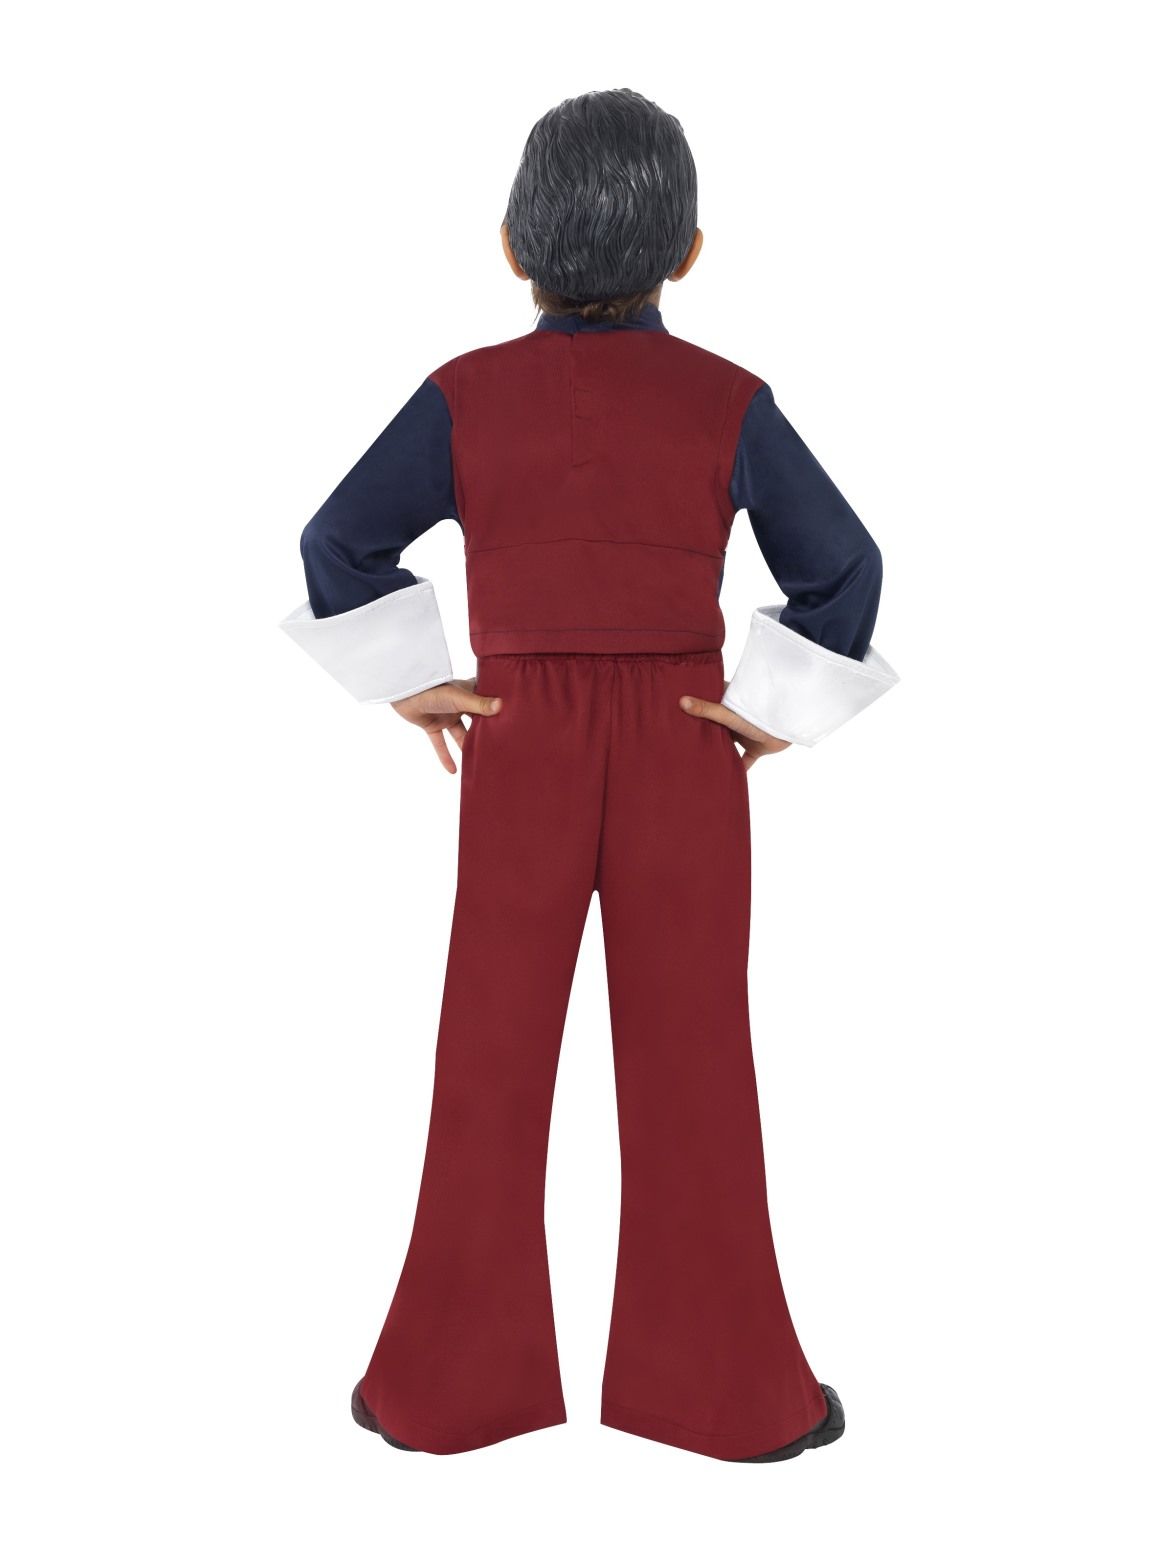 Lazy Town Robbie Rotten Costume